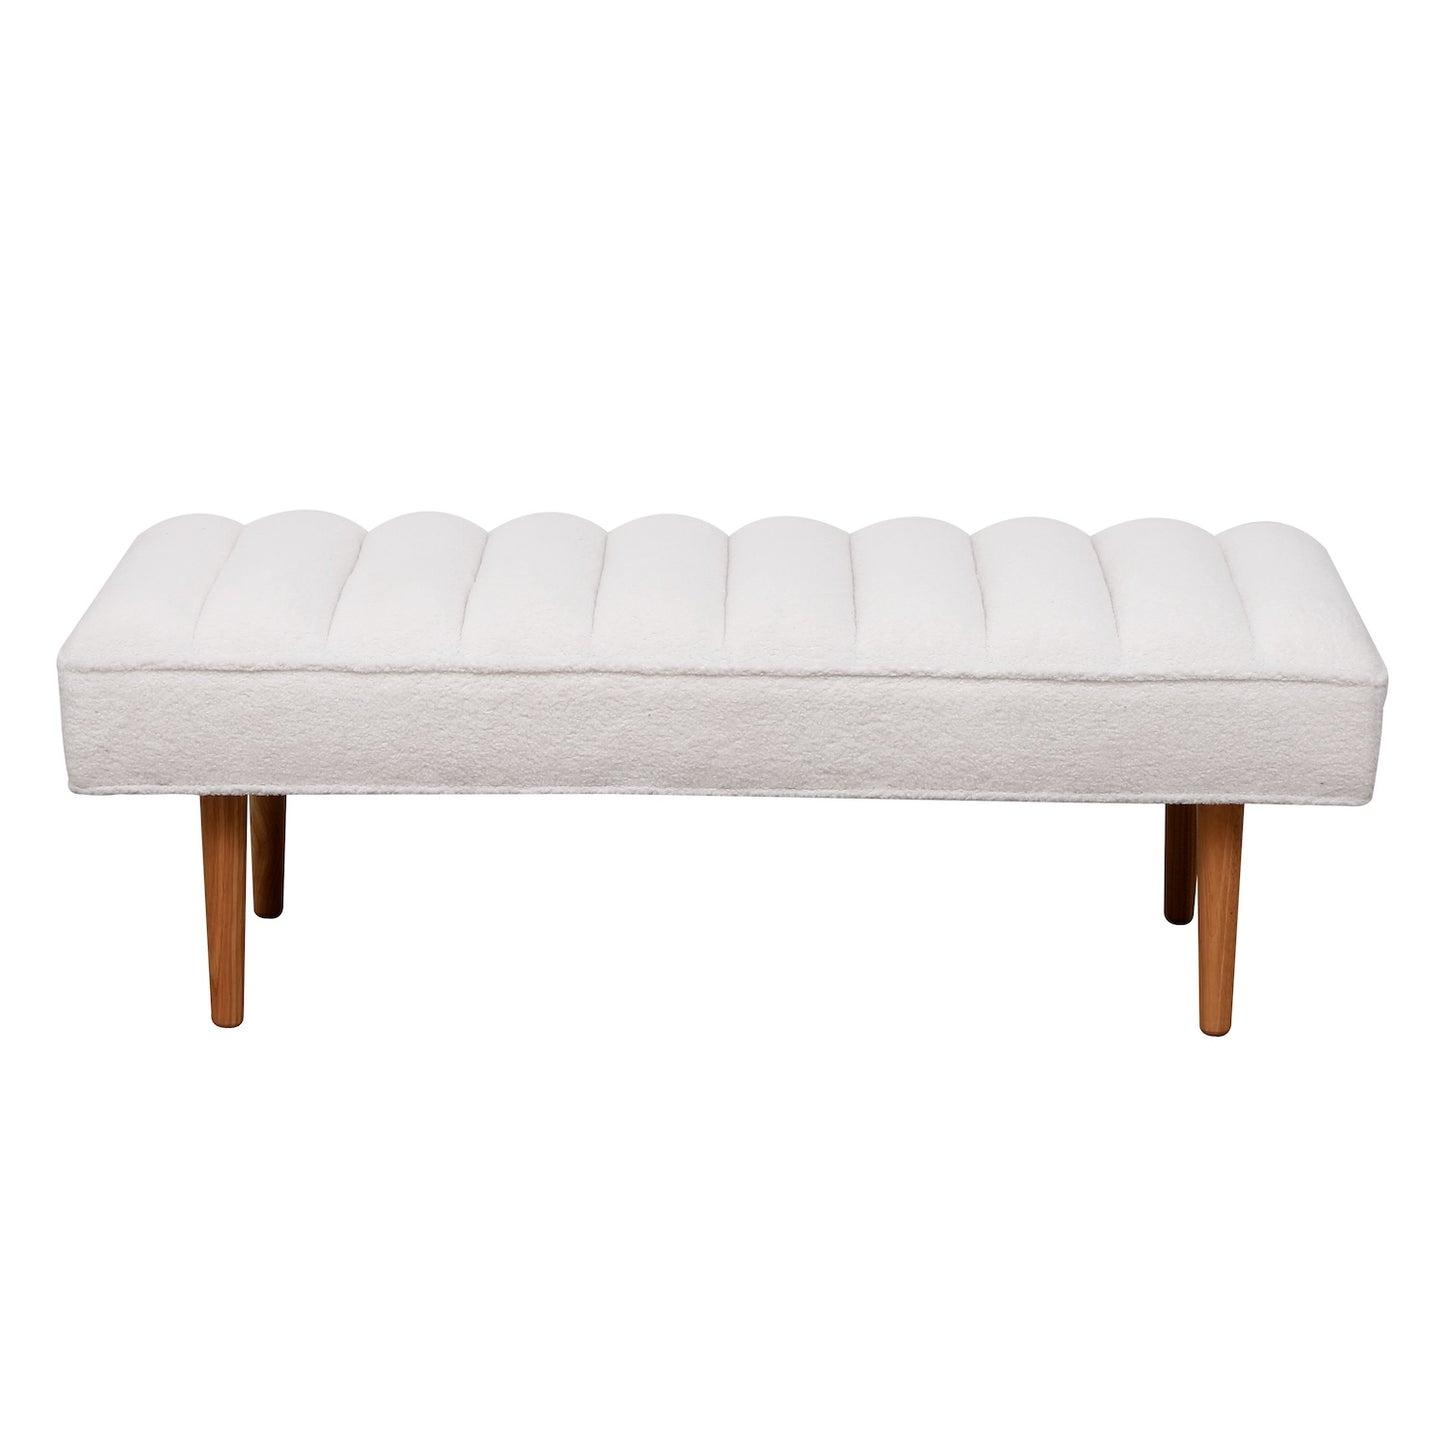 Channel Tufted Bench White Sherpa Upholstered End of Bed Benches with Wooden Legs White